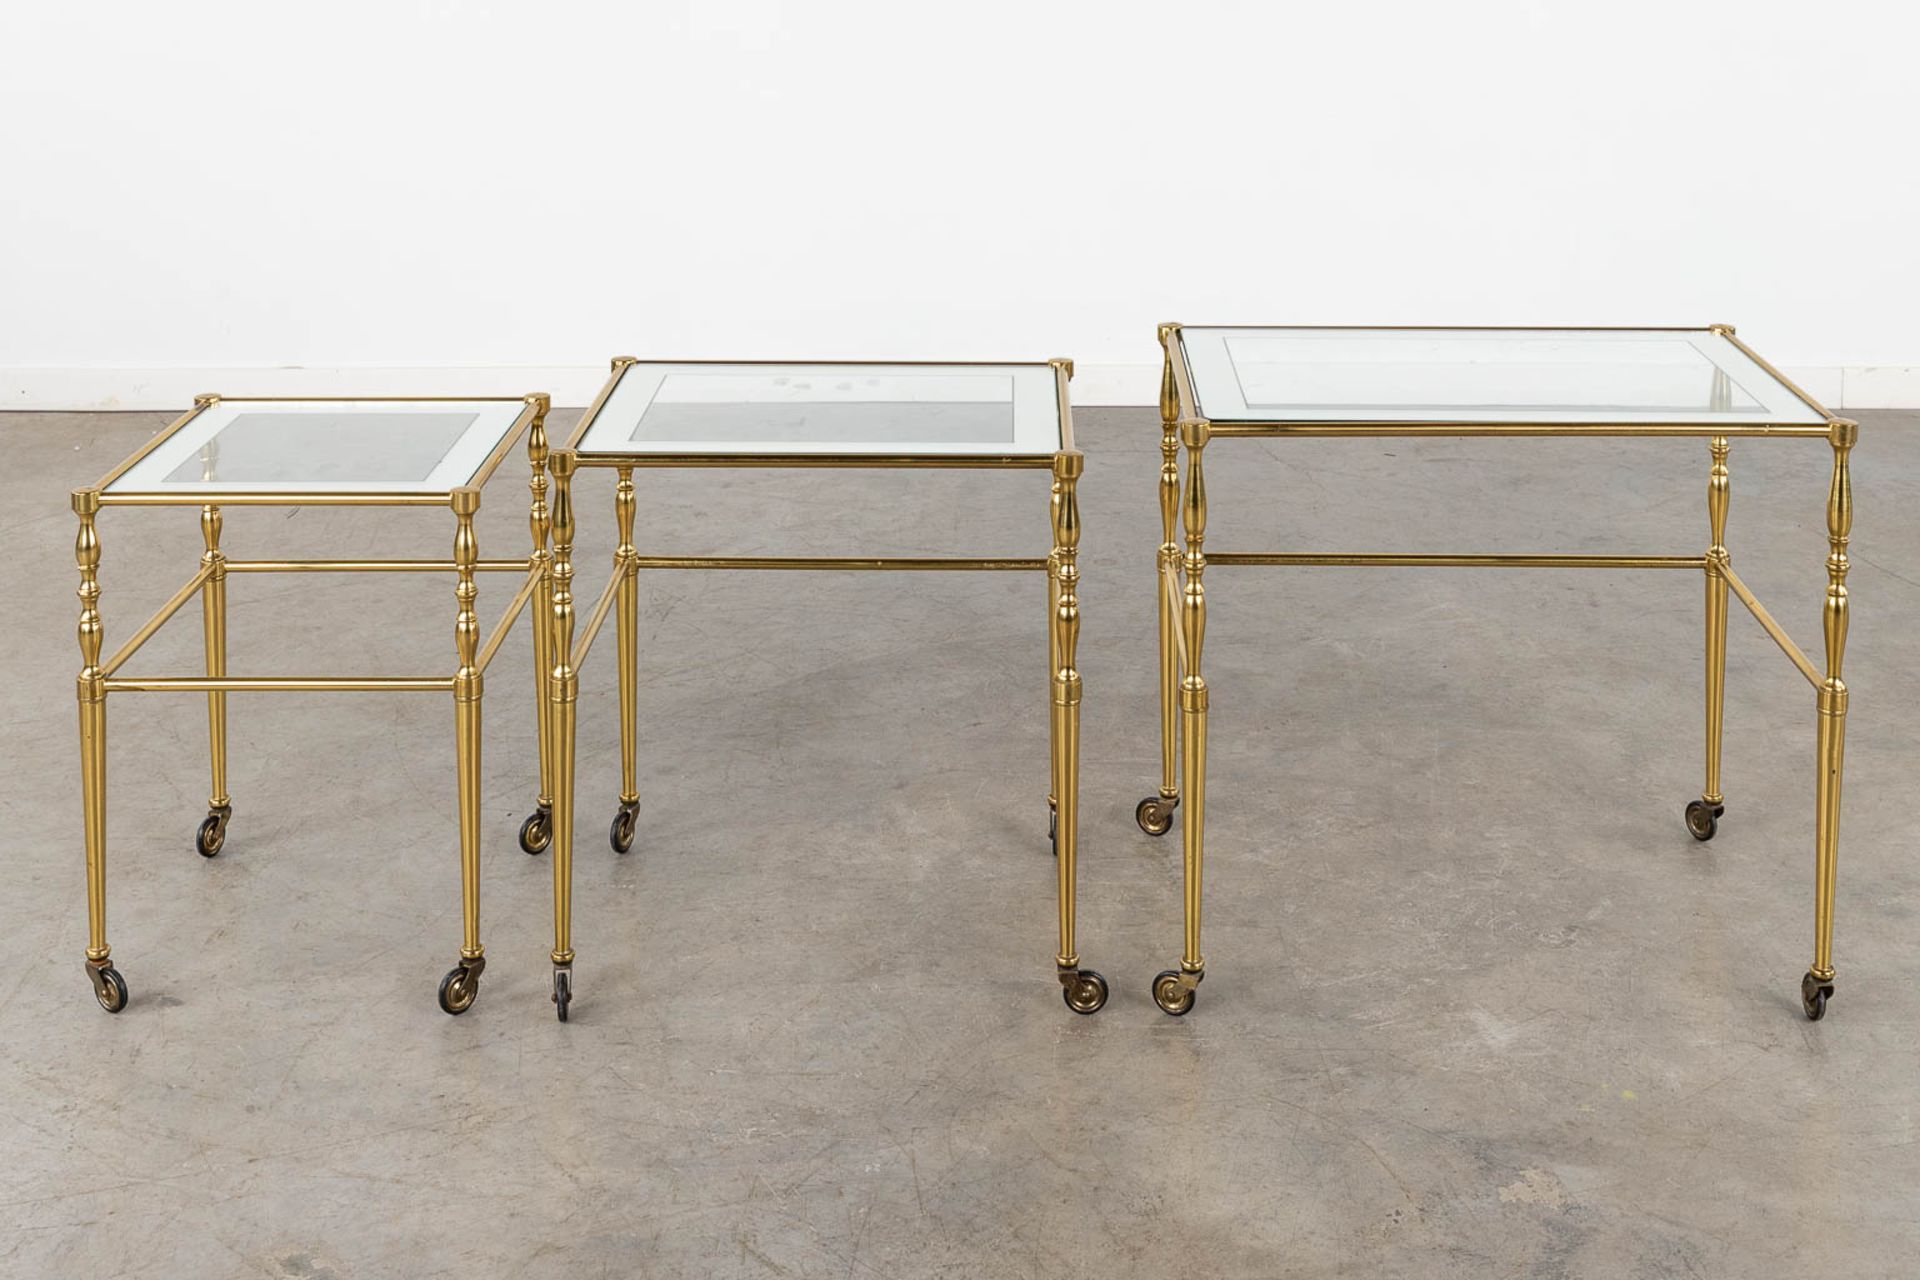 A set of nesting tables, brass and glass. 20th C. (D:39 x W:56 x H:52 cm) - Image 4 of 11